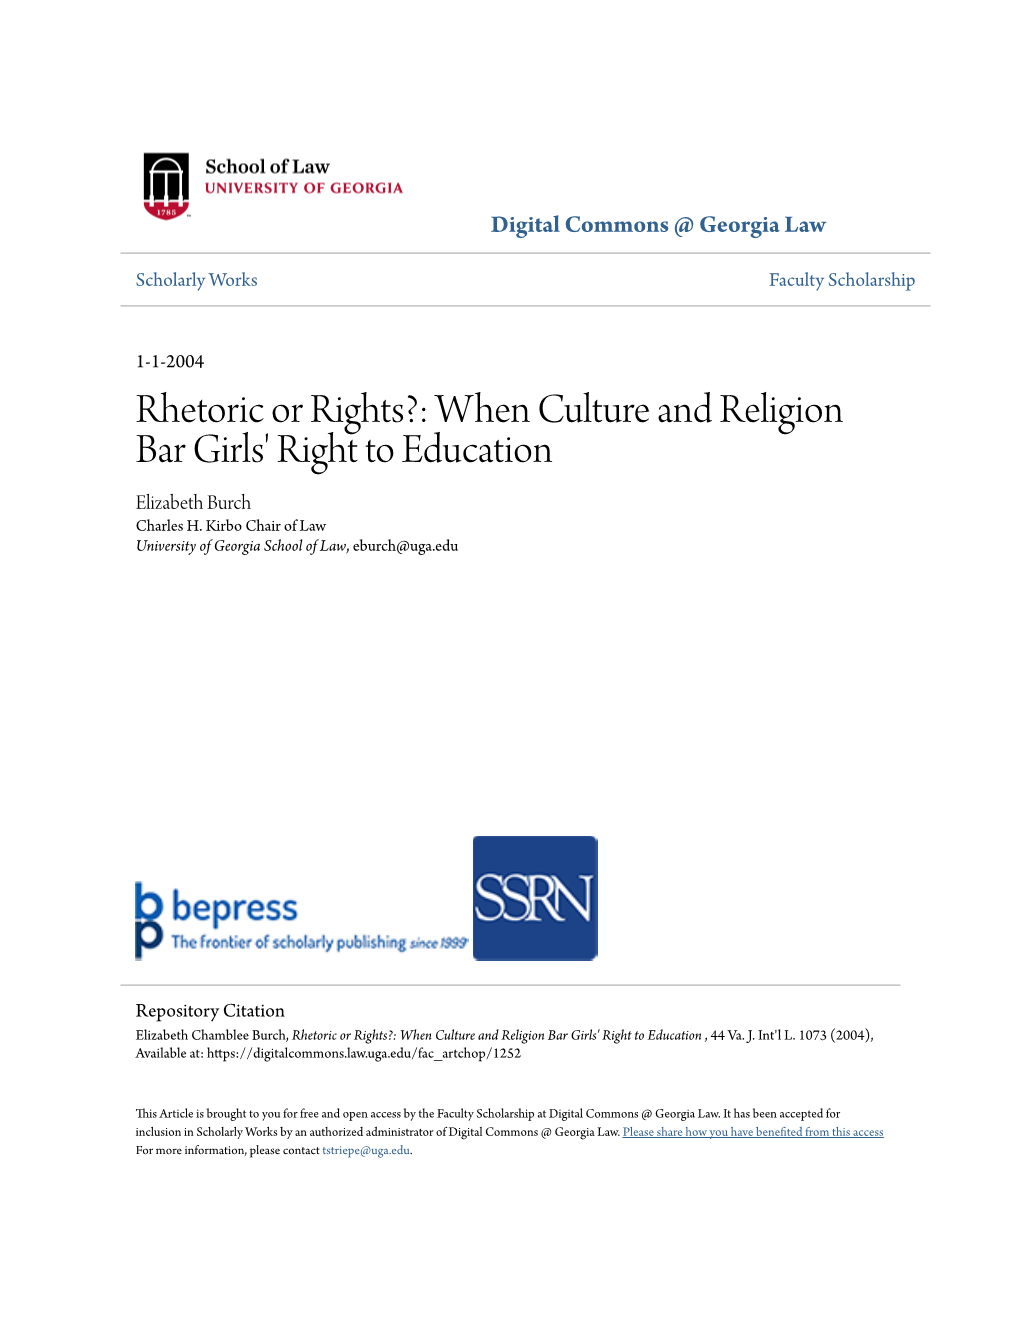 When Culture and Religion Bar Girls' Right to Education Elizabeth Burch Charles H